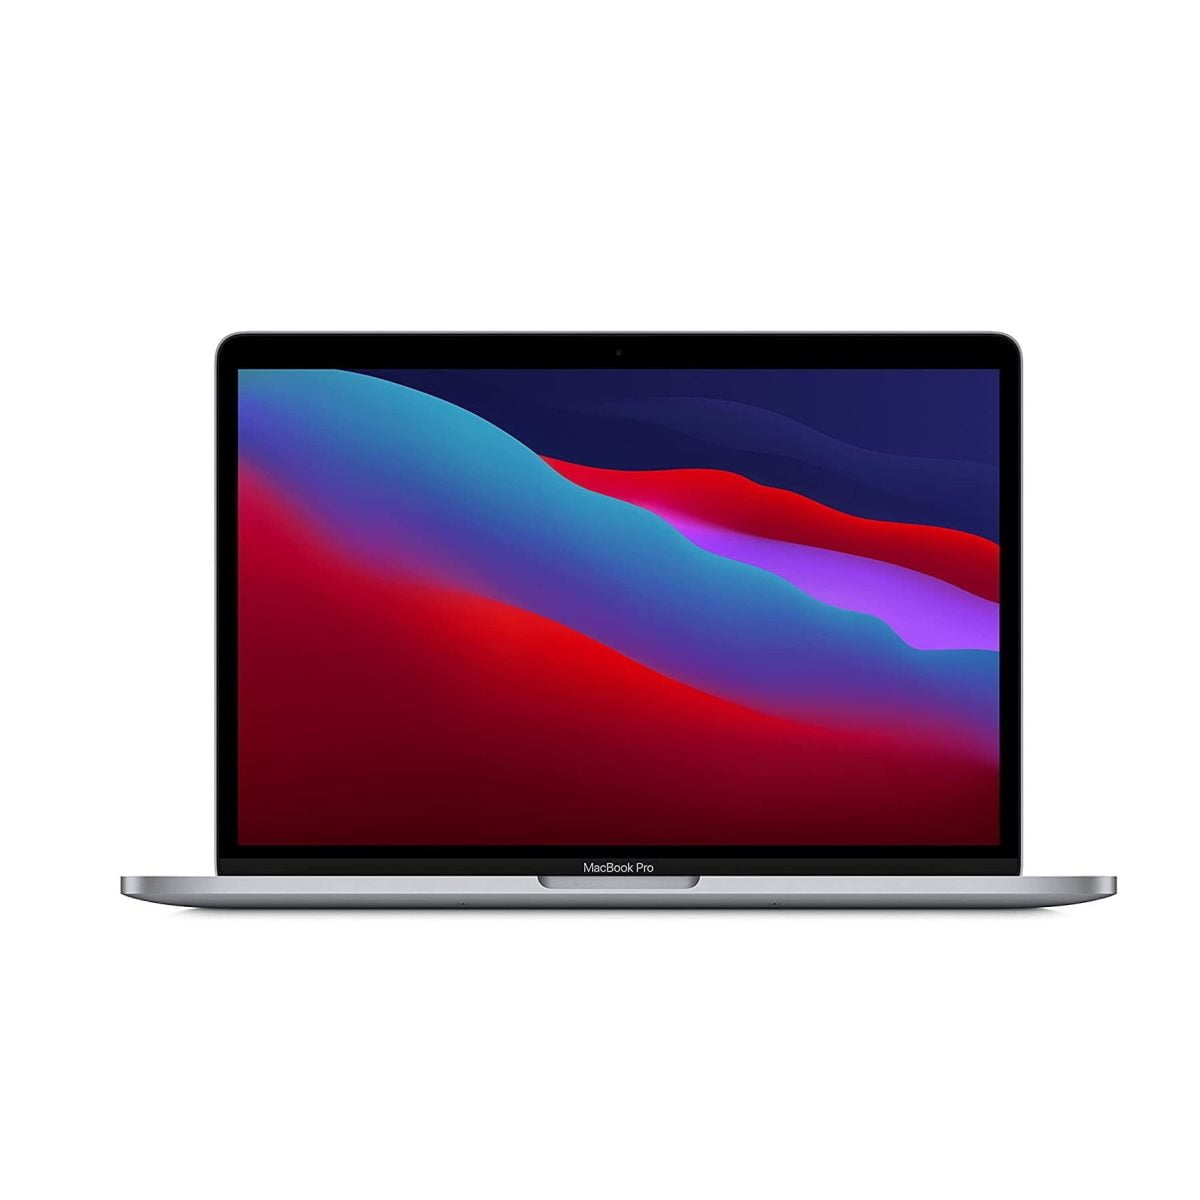 61Y5Nbpaxls. Ac Sl1500 Apple &Amp;Lt;H1 Id=&Amp;Quot;Title&Amp;Quot; Class=&Amp;Quot;A-Size-Large A-Spacing-None&Amp;Quot;&Amp;Gt;Macbook Pro 13.3&Amp;Quot; Laptop - Apple M1 Chip - 8Gb Memory - 256Gb Ssd (Latest Model) - Space Gray(English Keyboard)&Amp;Lt;/H1&Amp;Gt; &Amp;Lt;P Class=&Amp;Quot;Heading-5 V-Fw-Regular Description-Heading&Amp;Quot;&Amp;Gt;&Amp;Lt;Span Style=&Amp;Quot;Color: #333333;Font-Size: 16Px&Amp;Quot;&Amp;Gt;The Apple M1 Chip Redefines The 13-Inch Macbook Pro. Featuring An 8-Core Cpu That Flies Through Complex Workflows In Photography, Coding, Video Editing, And More. Incredible 8-Core Gpu That Crushes Graphics-Intensive Tasks And Enables Super-Smooth Gaming. An Advanced 16-Core Neural Engine For More Machine Learning Power In Your Favorite Apps. Superfast Unified Memory For Fluid Performance. And The Longest-Ever Battery Life In A Mac At Up To 20 Hours.² It’s Apple'S Most Popular Pro Notebook. Way More Performance And Way More Pro.&Amp;Lt;/Span&Amp;Gt;&Amp;Lt;/P&Amp;Gt; Macbook Pro 13 Macbook Pro 13&Amp;Quot; Laptop - Apple M1 Chip - 8Gb Memory - 256Gb Ssd (Myd82) - Space Gray